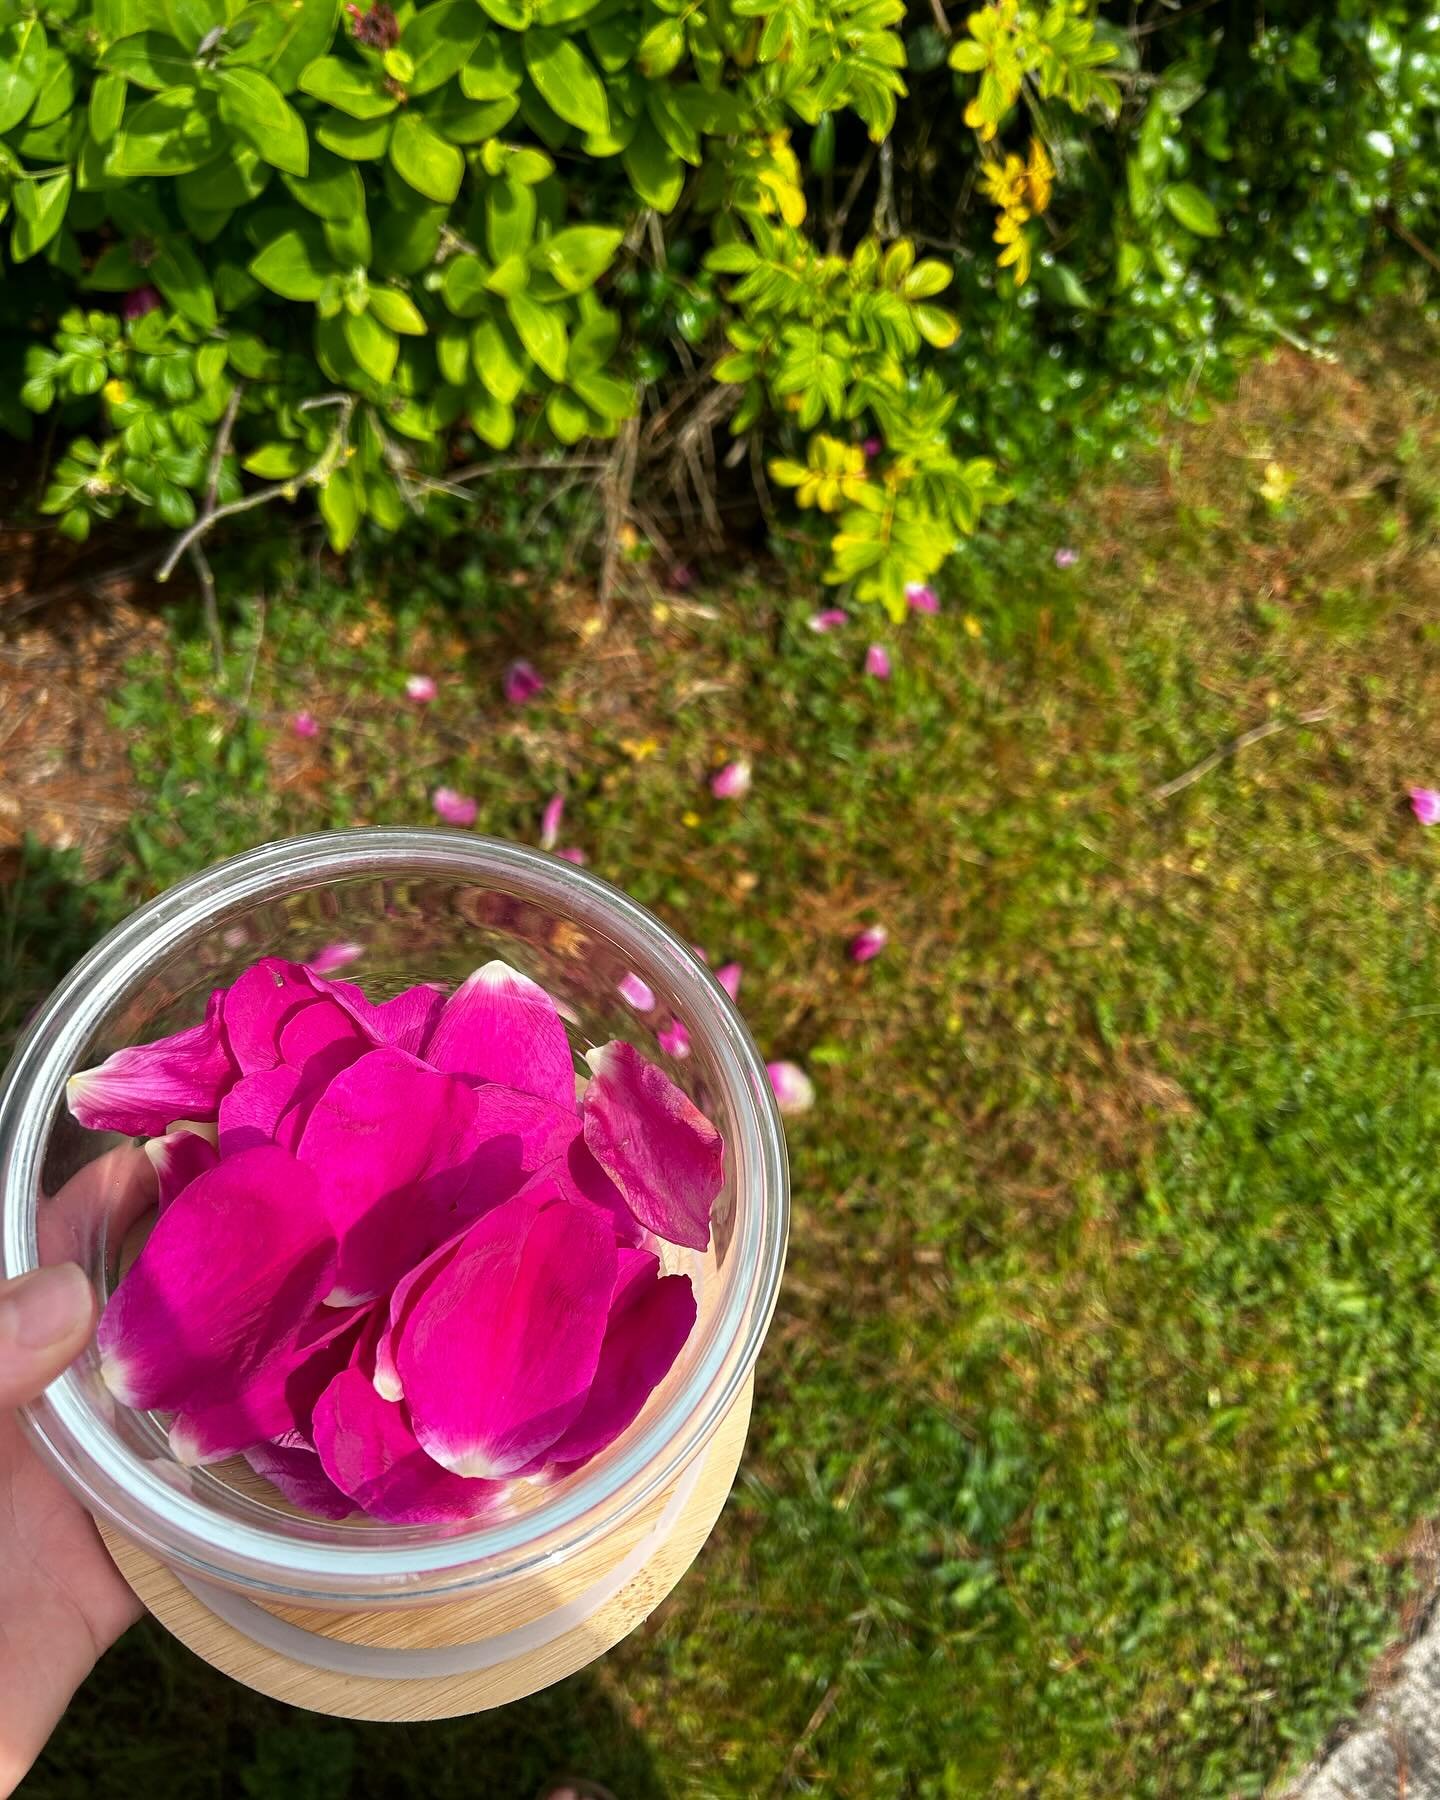 What an honor it has been to gather Wild Rose infused by the salty sea air for the Rose Water Sprays for Way of the Rose Group Immersion today.

As we left our seaside nest today I took some time to gather these gorgeous rose petals in preparation fo